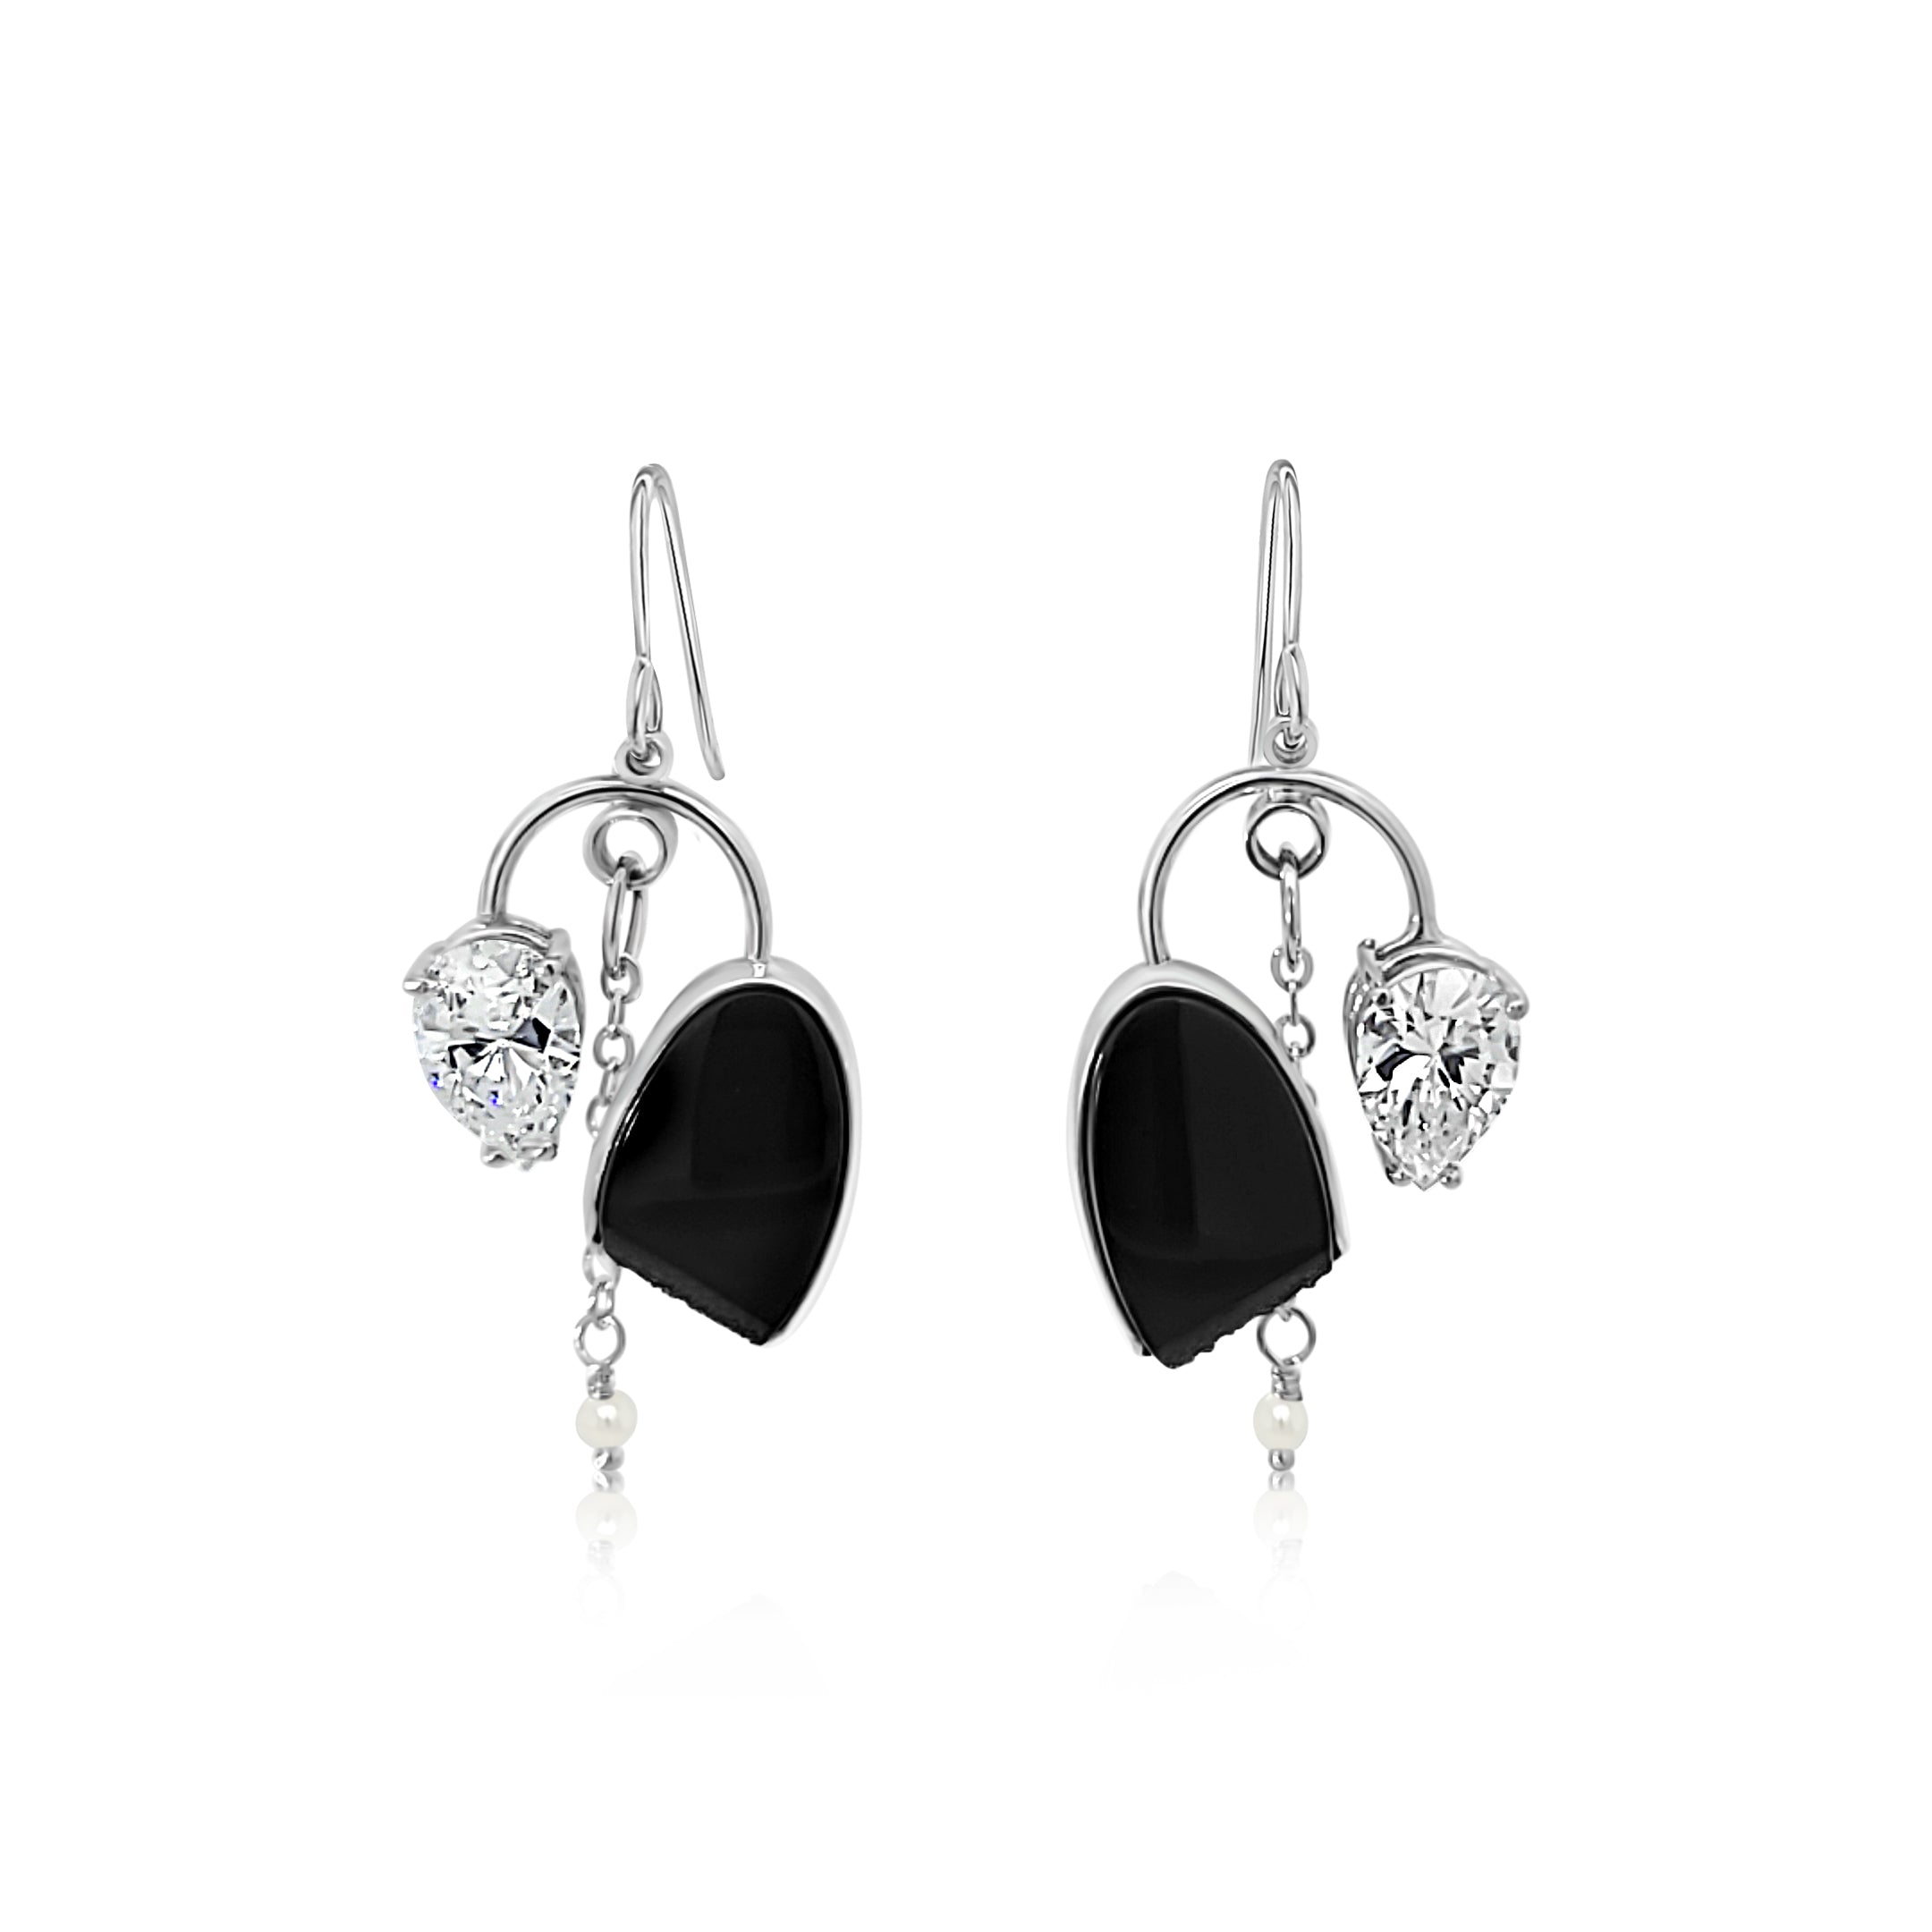 Black Onyx, Pear Shaped Cubic Zirconia and Freshwater Pearl Earrings